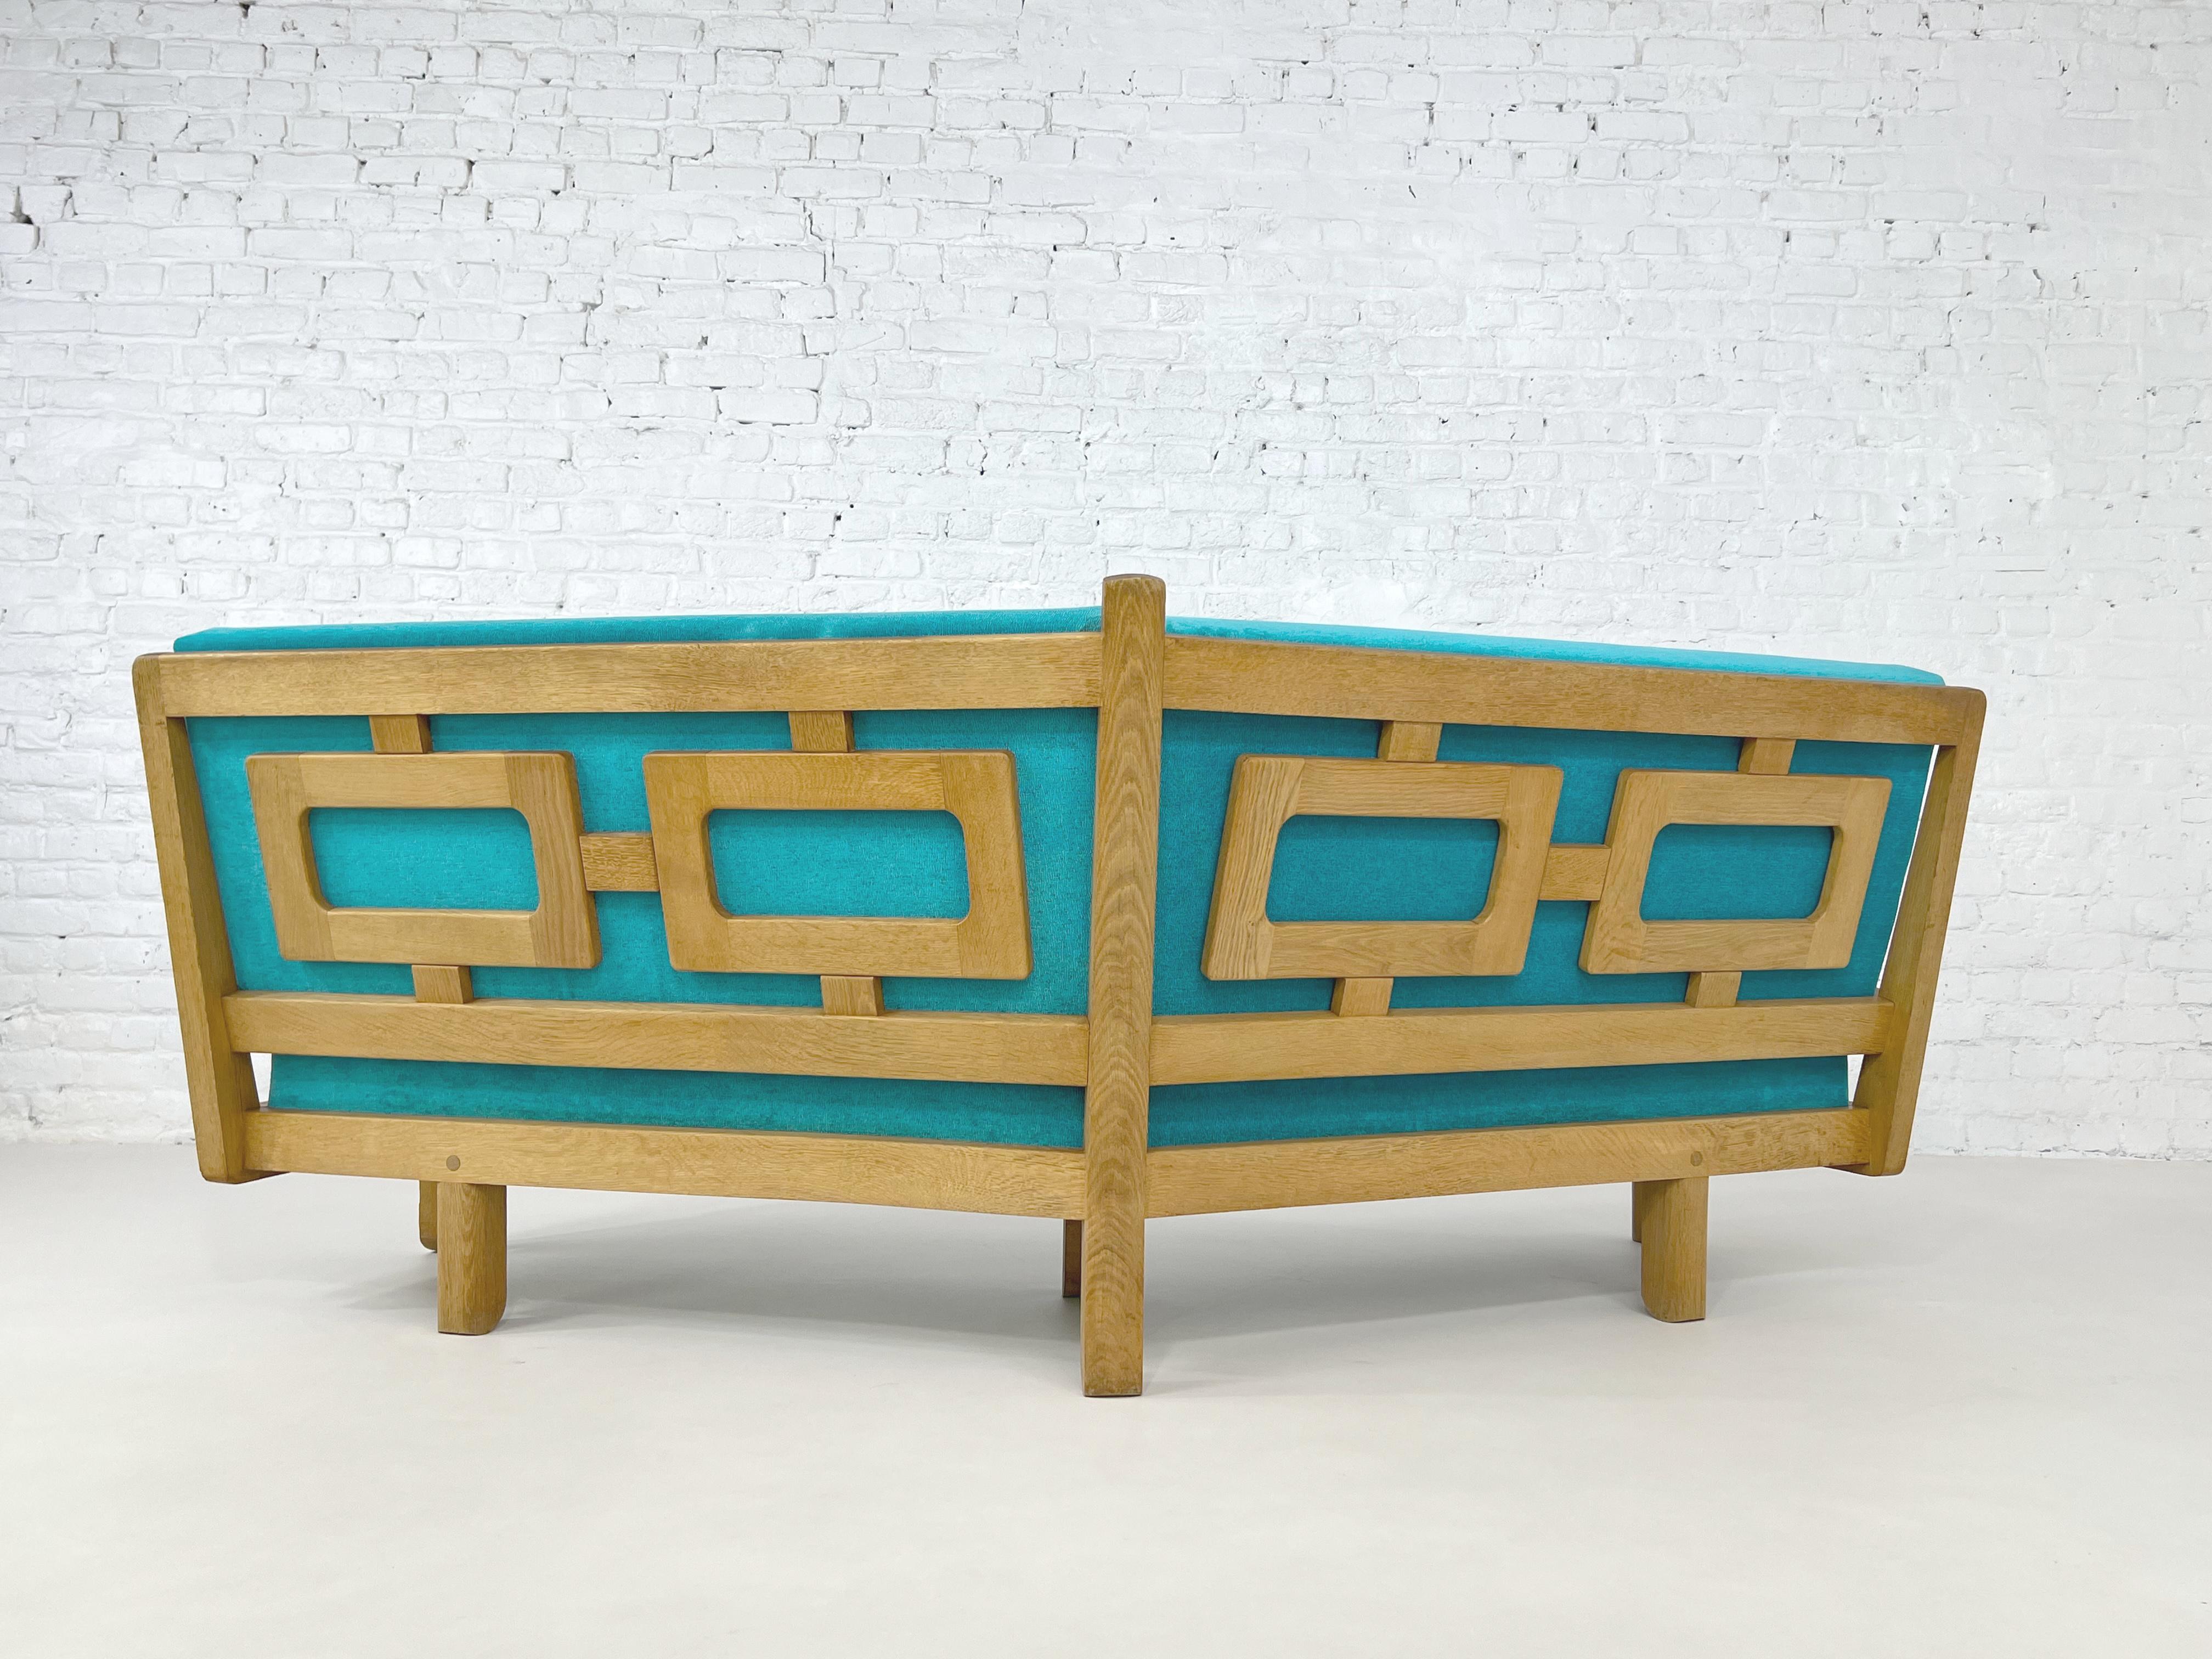 1950s - 1960s Guillerme et Chambron French Design Oak Wood Angular Curved Sofa For Sale 3